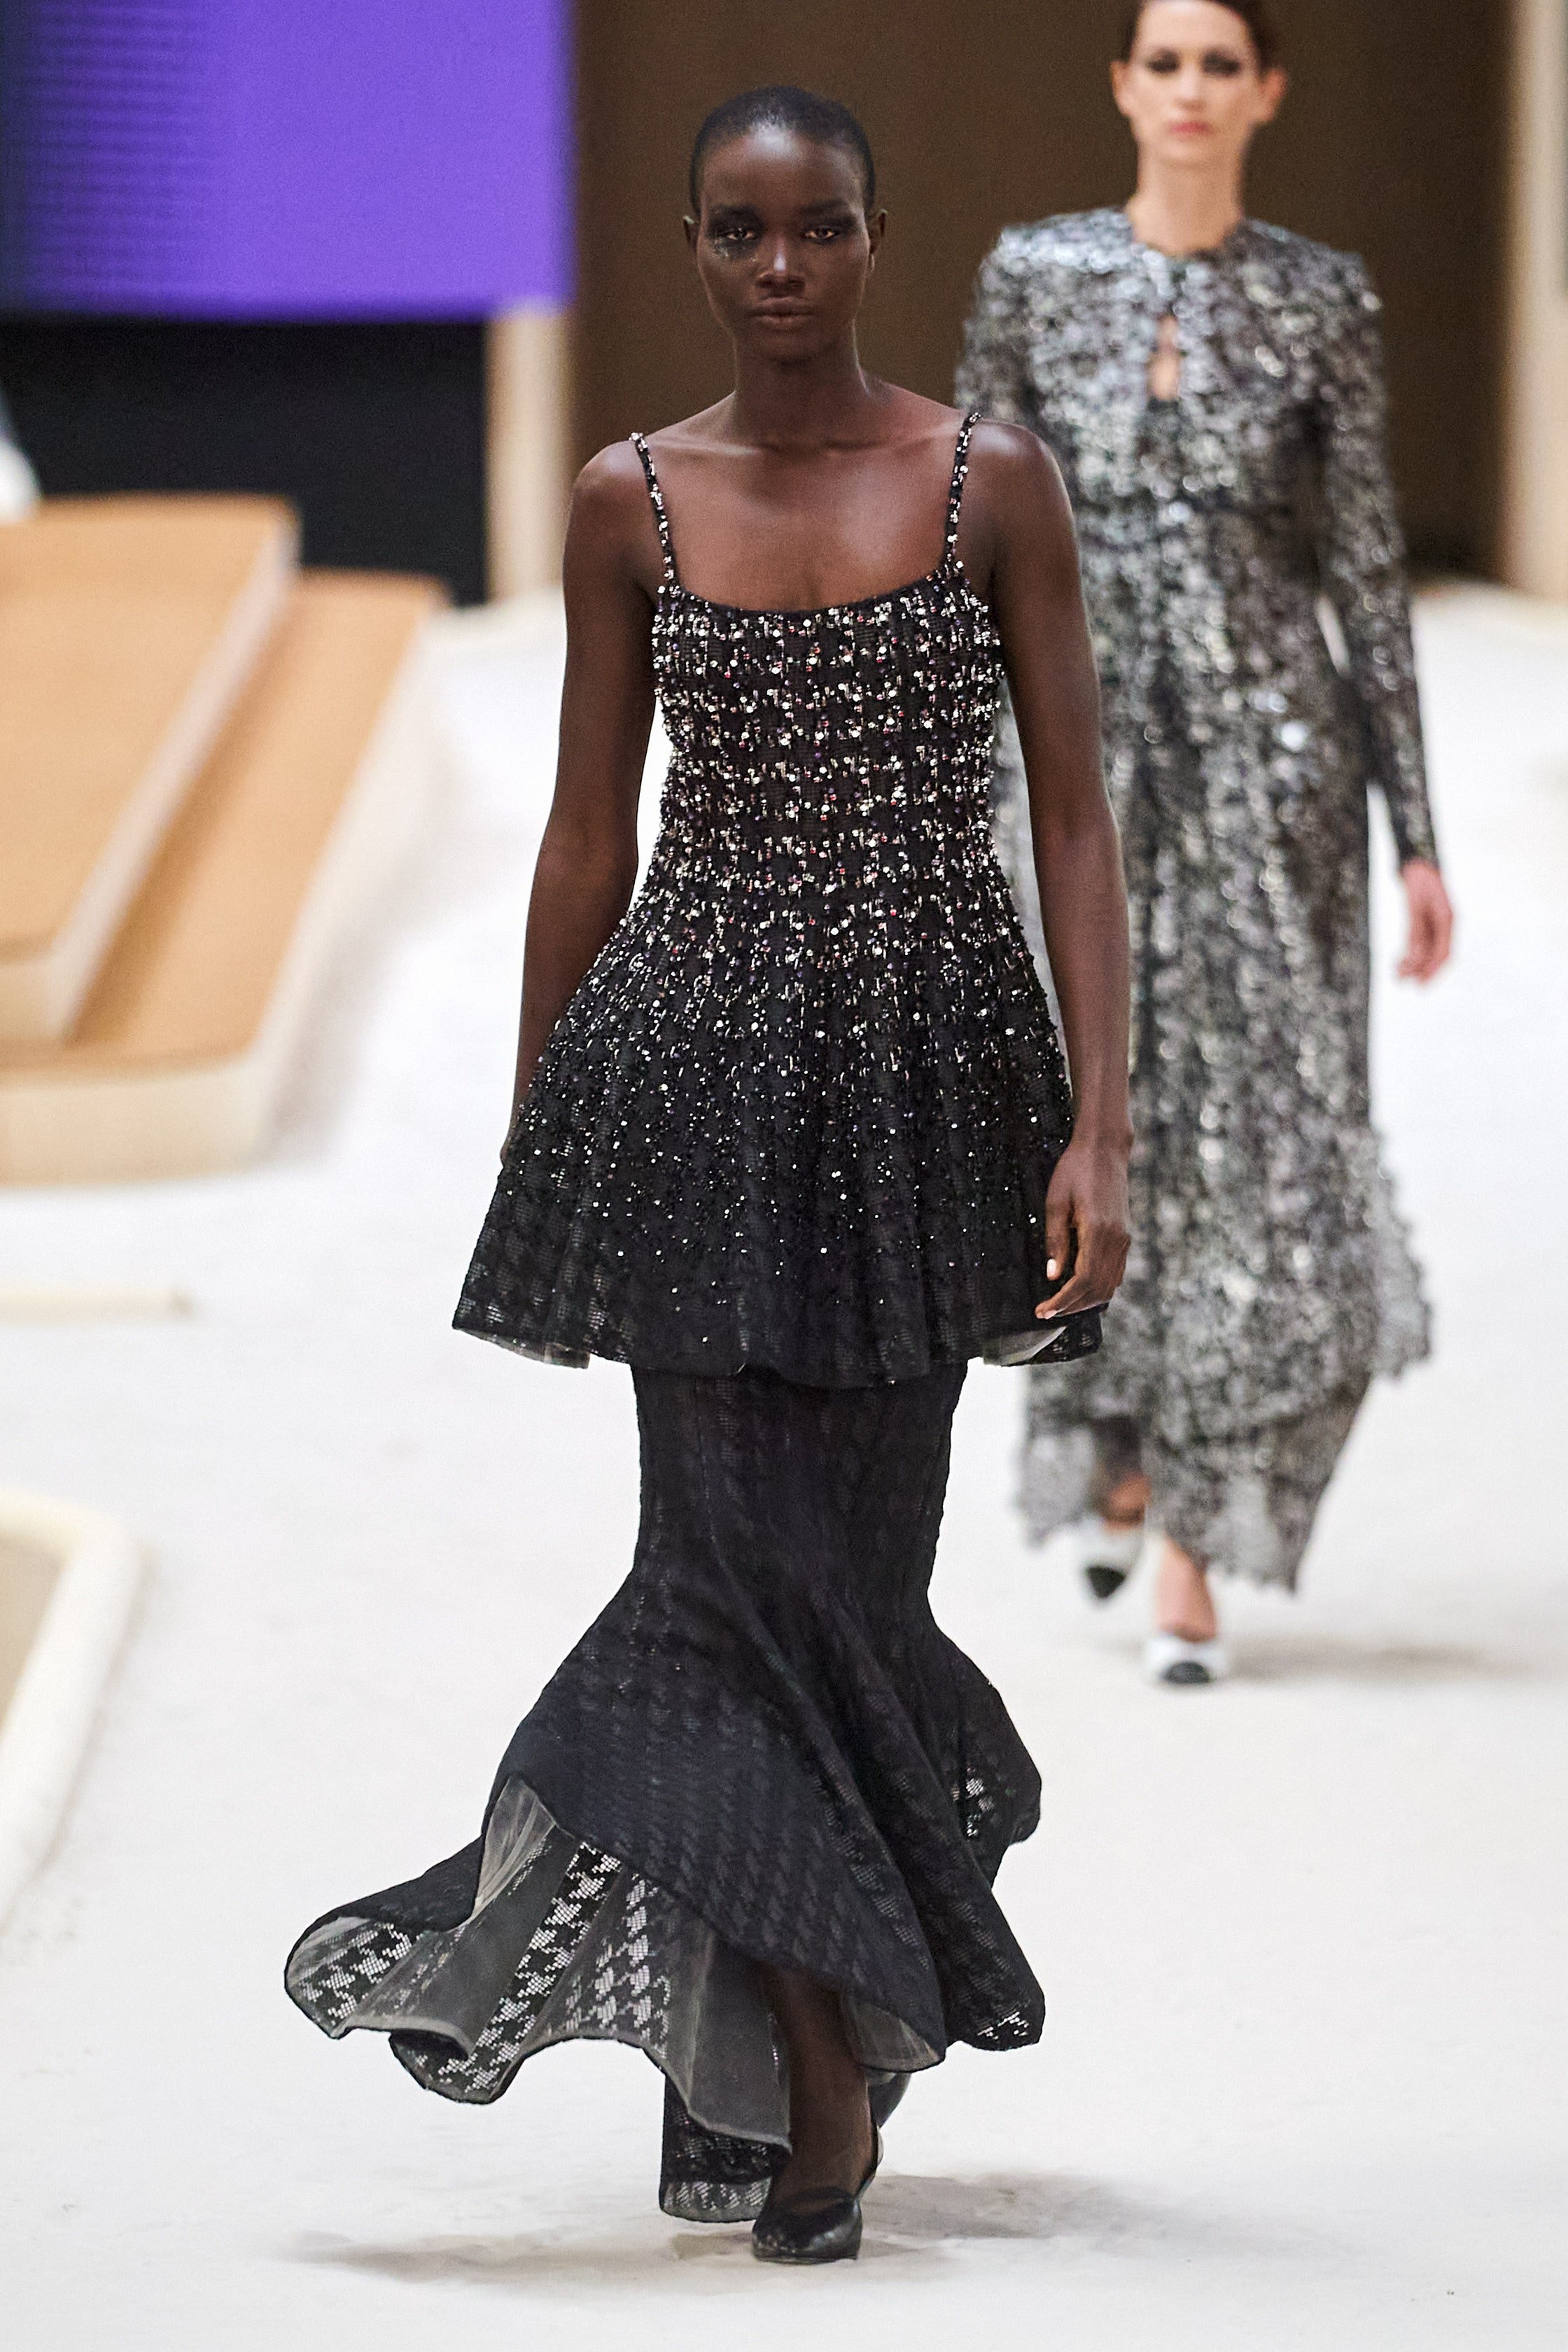 00020-Chanel-Couture-Spring-22-credit-gorunway.jpeg